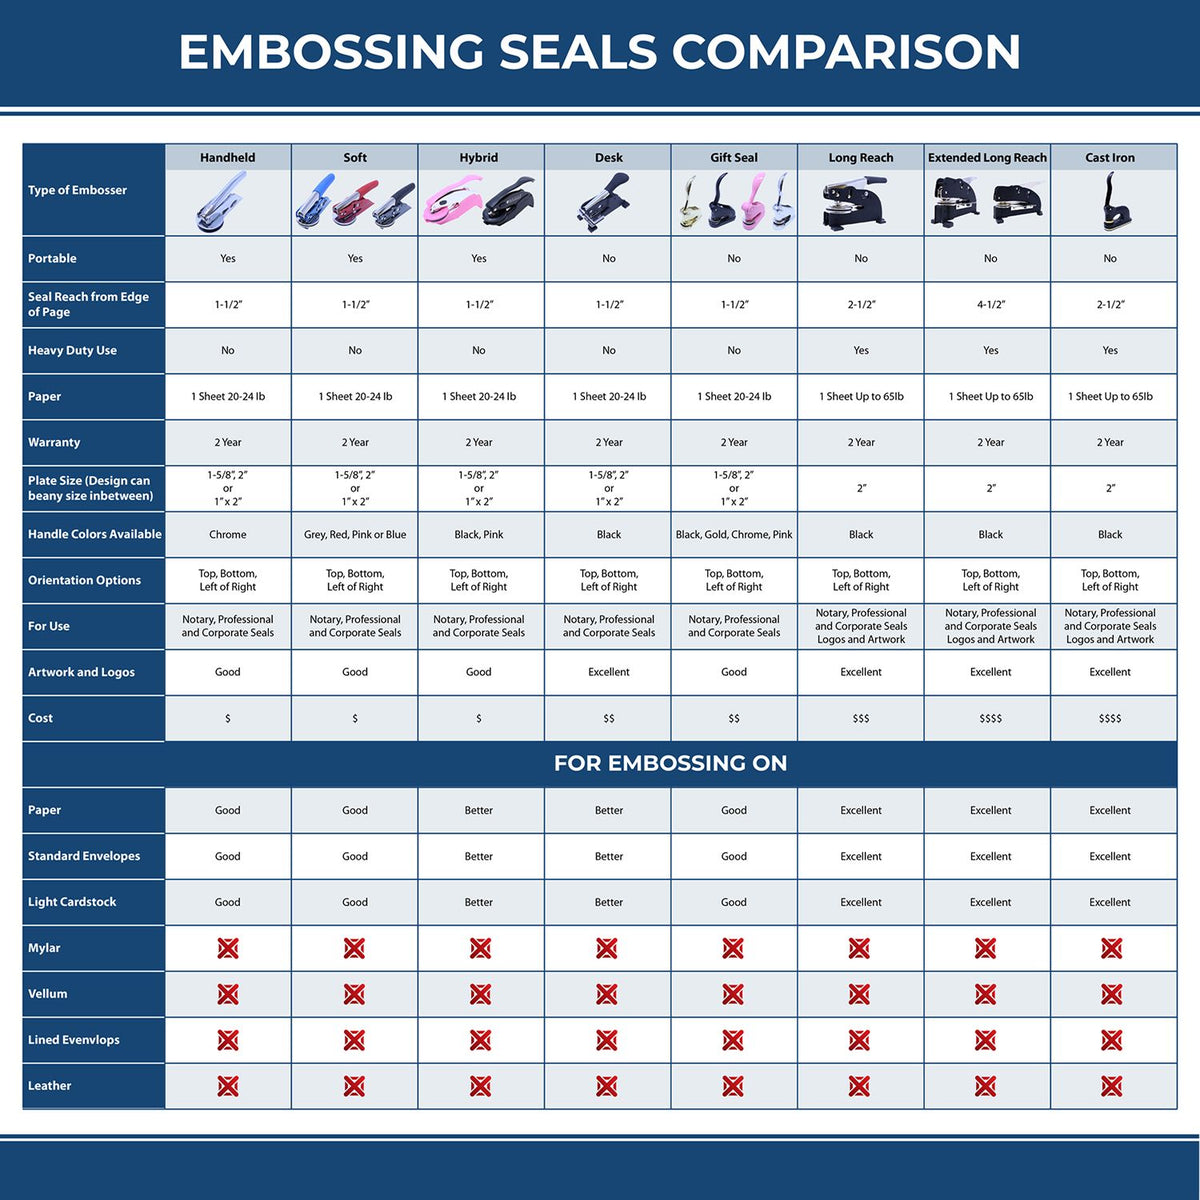 A comparison chart for the different types of mount models available for the Soft Washington Professional Engineer Seal.